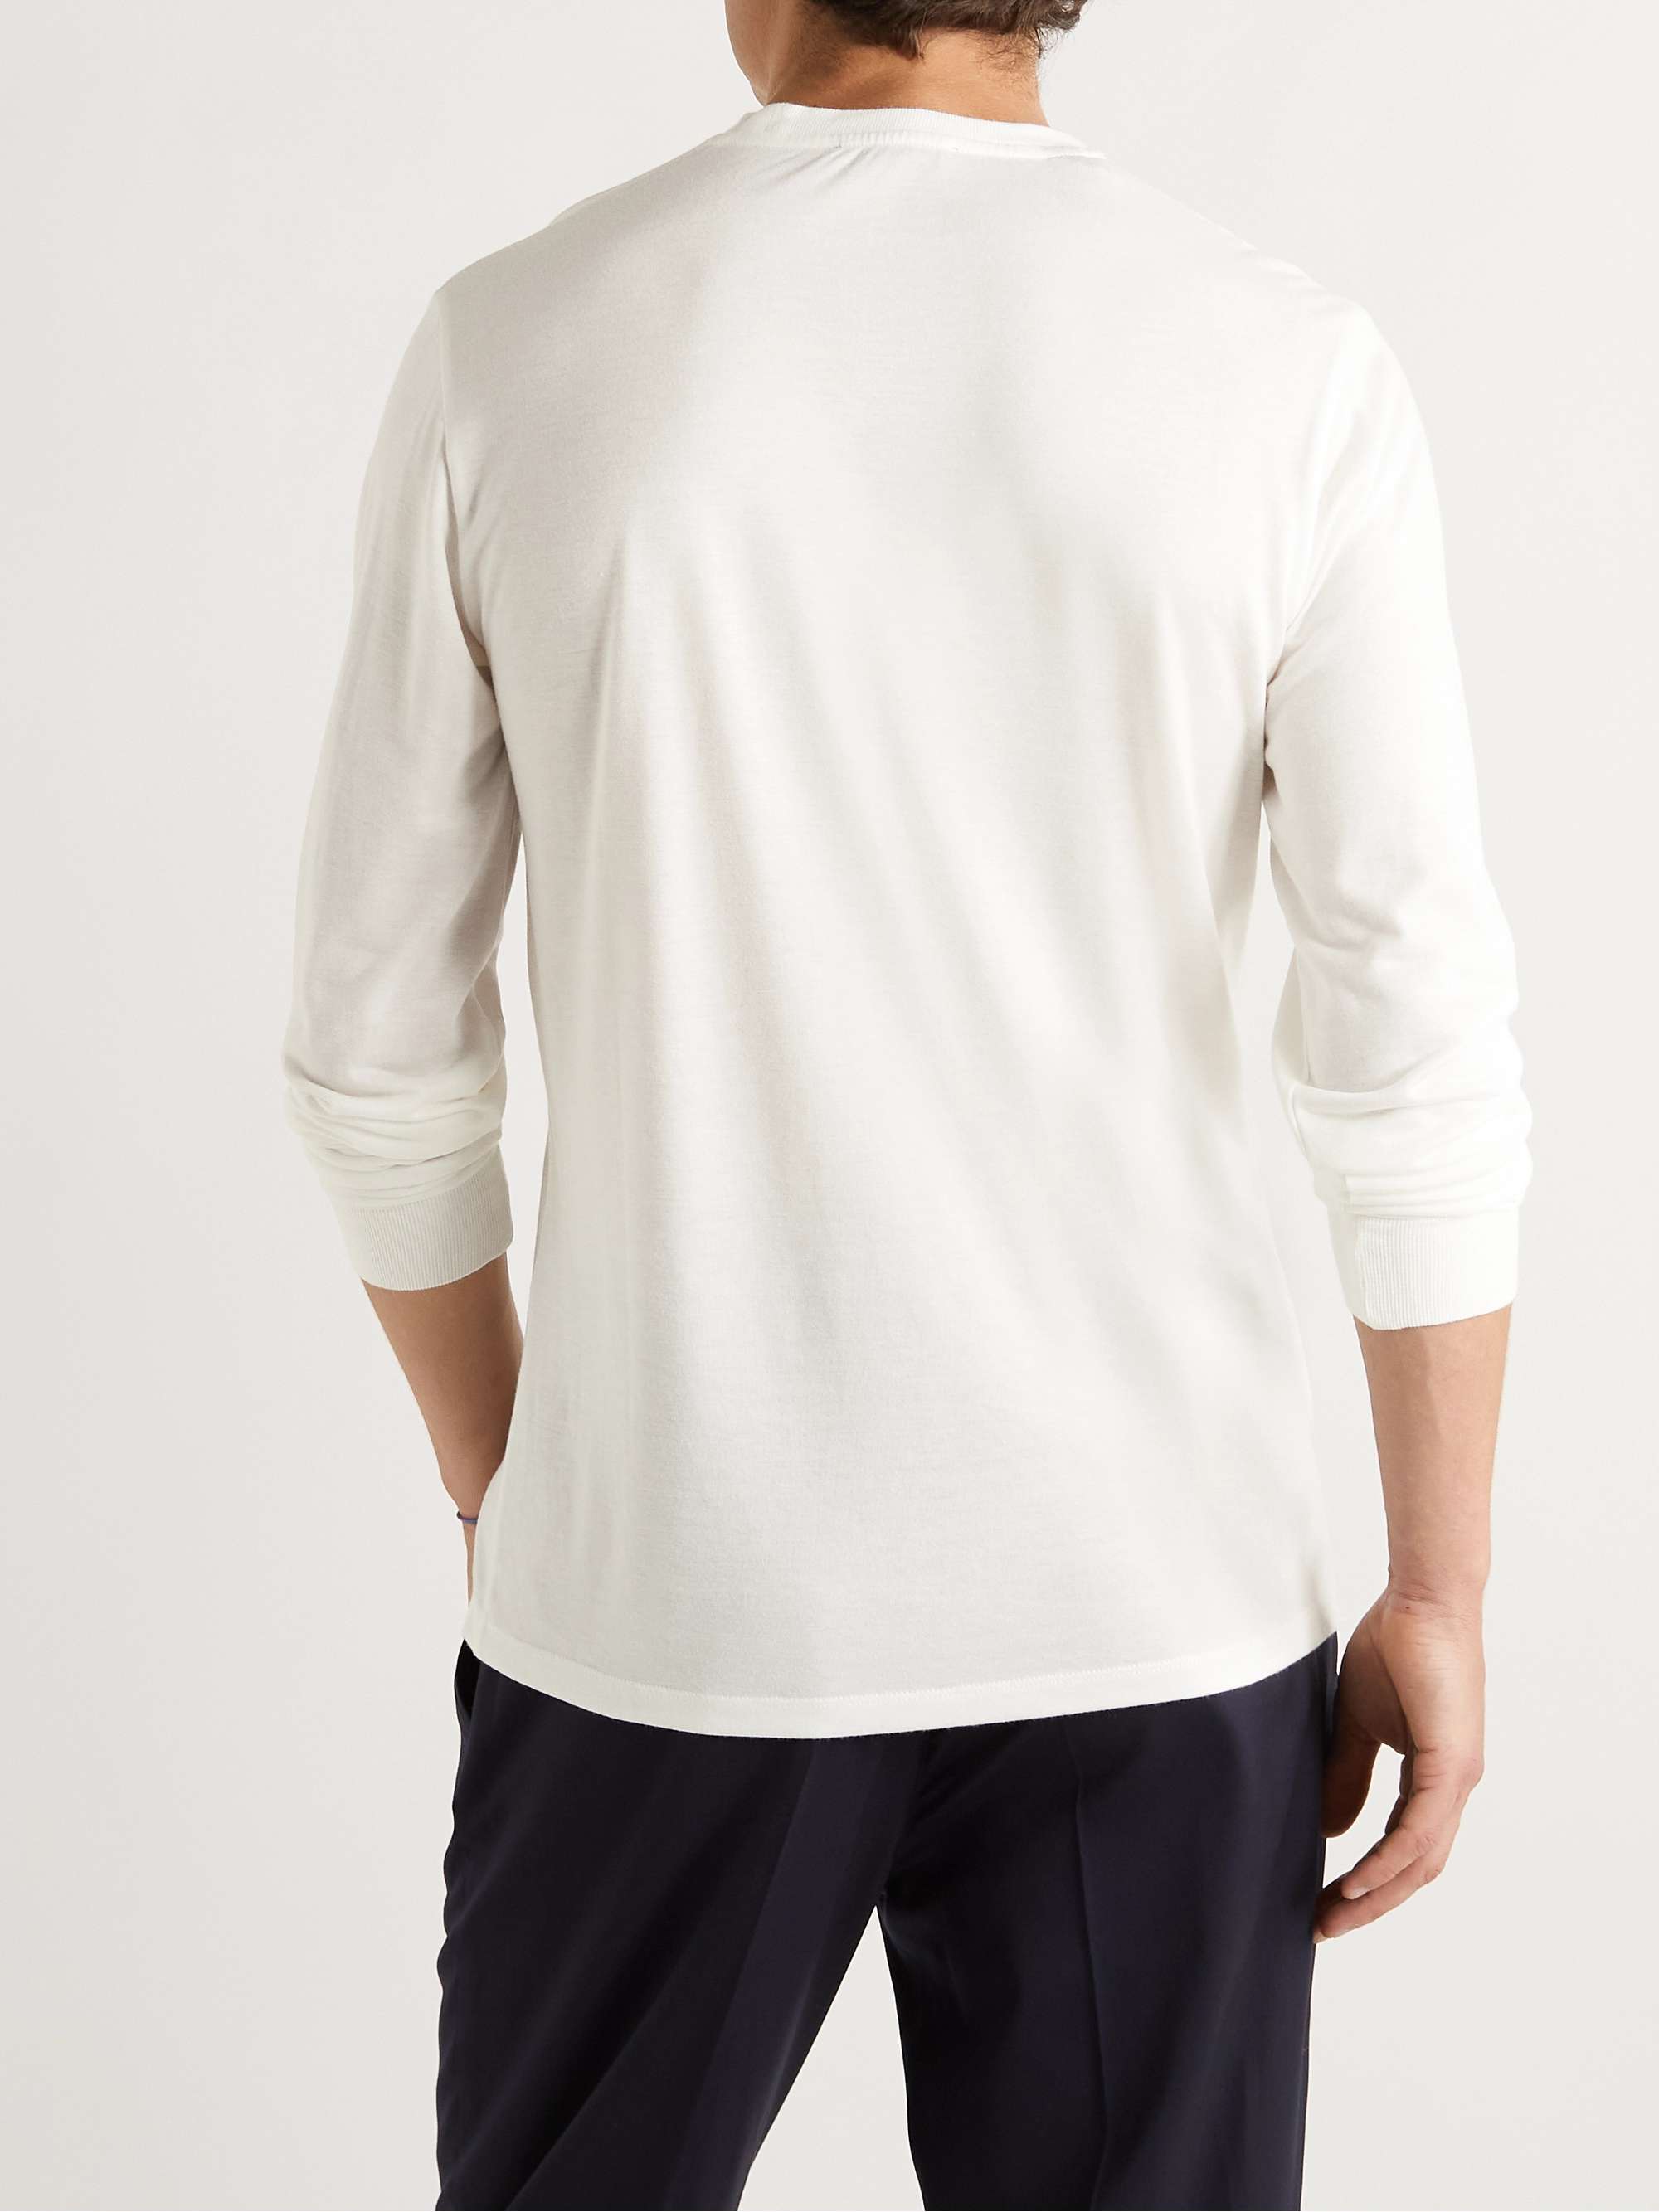 TOM FORD Slim-Fit Jersey T-Shirt